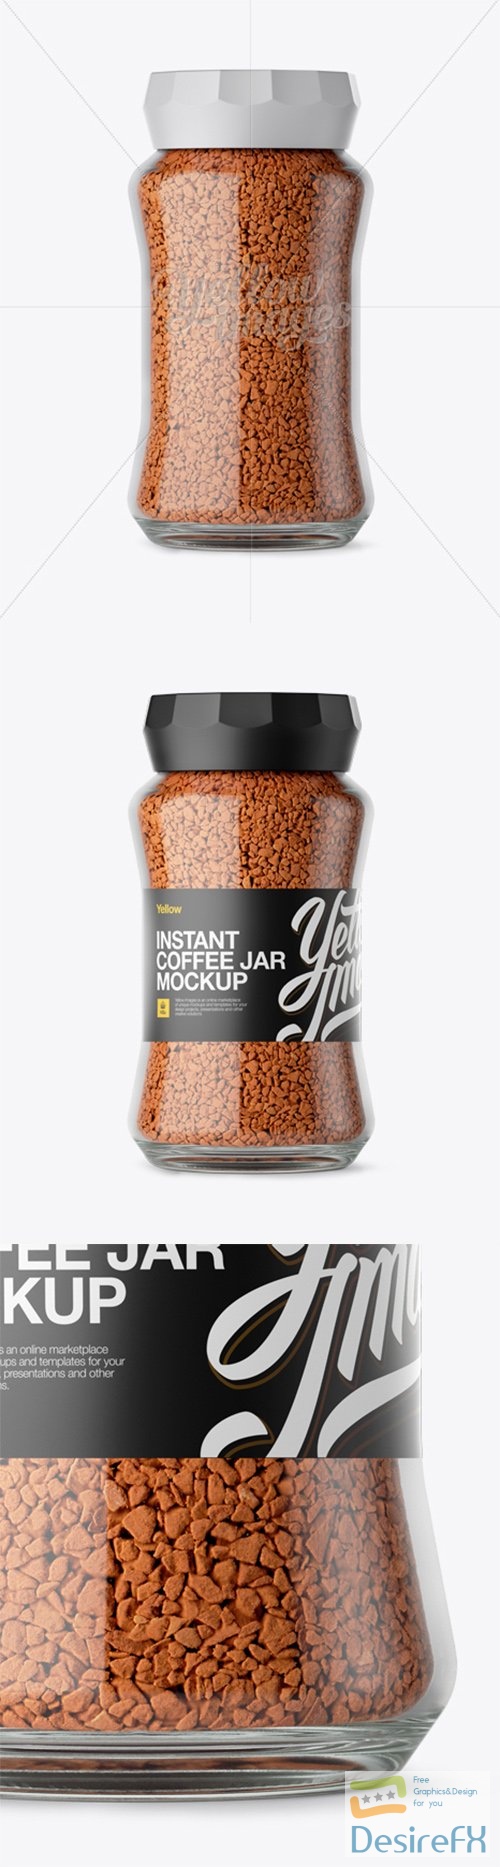 Clear Glass Jar With Instant Coffee Mockup 13617 TIF